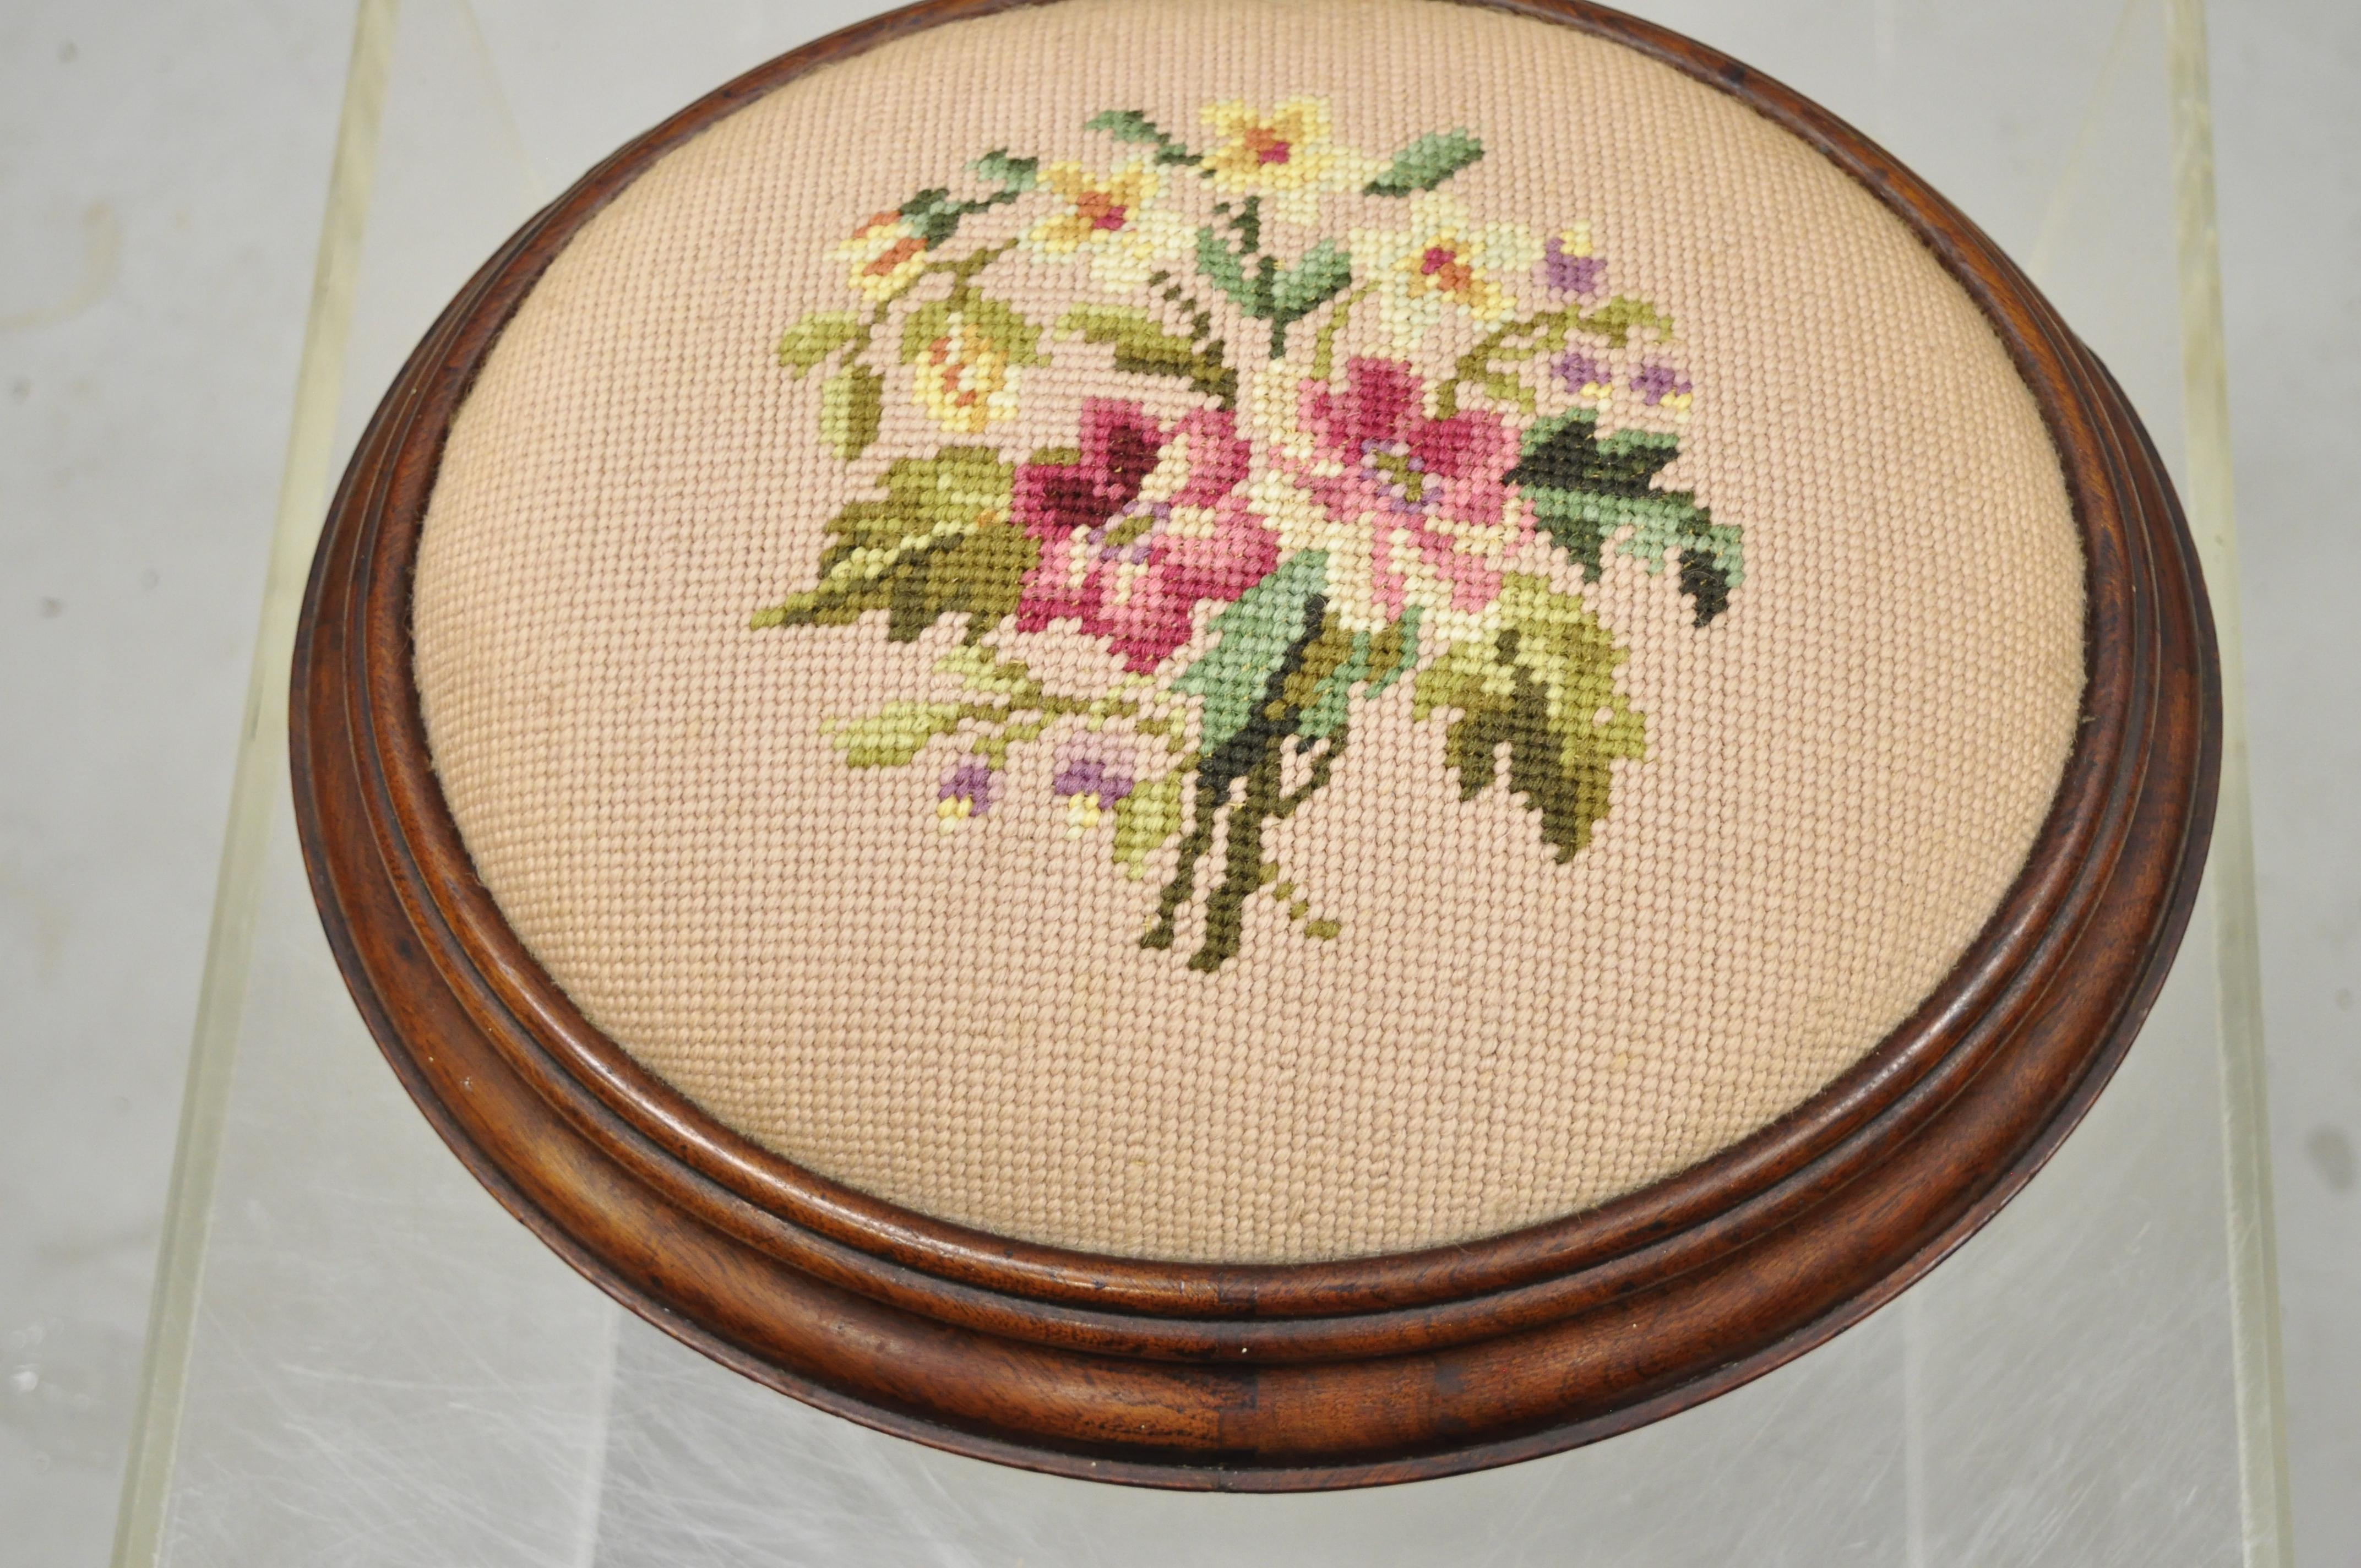 Antique Victorian Empire Pink Needlepoint Oval Mahogany Petite small ottoman footstool. Item features unique oval shape, mahogany wood frame, bun feet, floral needlepoint upholstered seat, beautiful wood grain, very nice antique item. Circa 19th